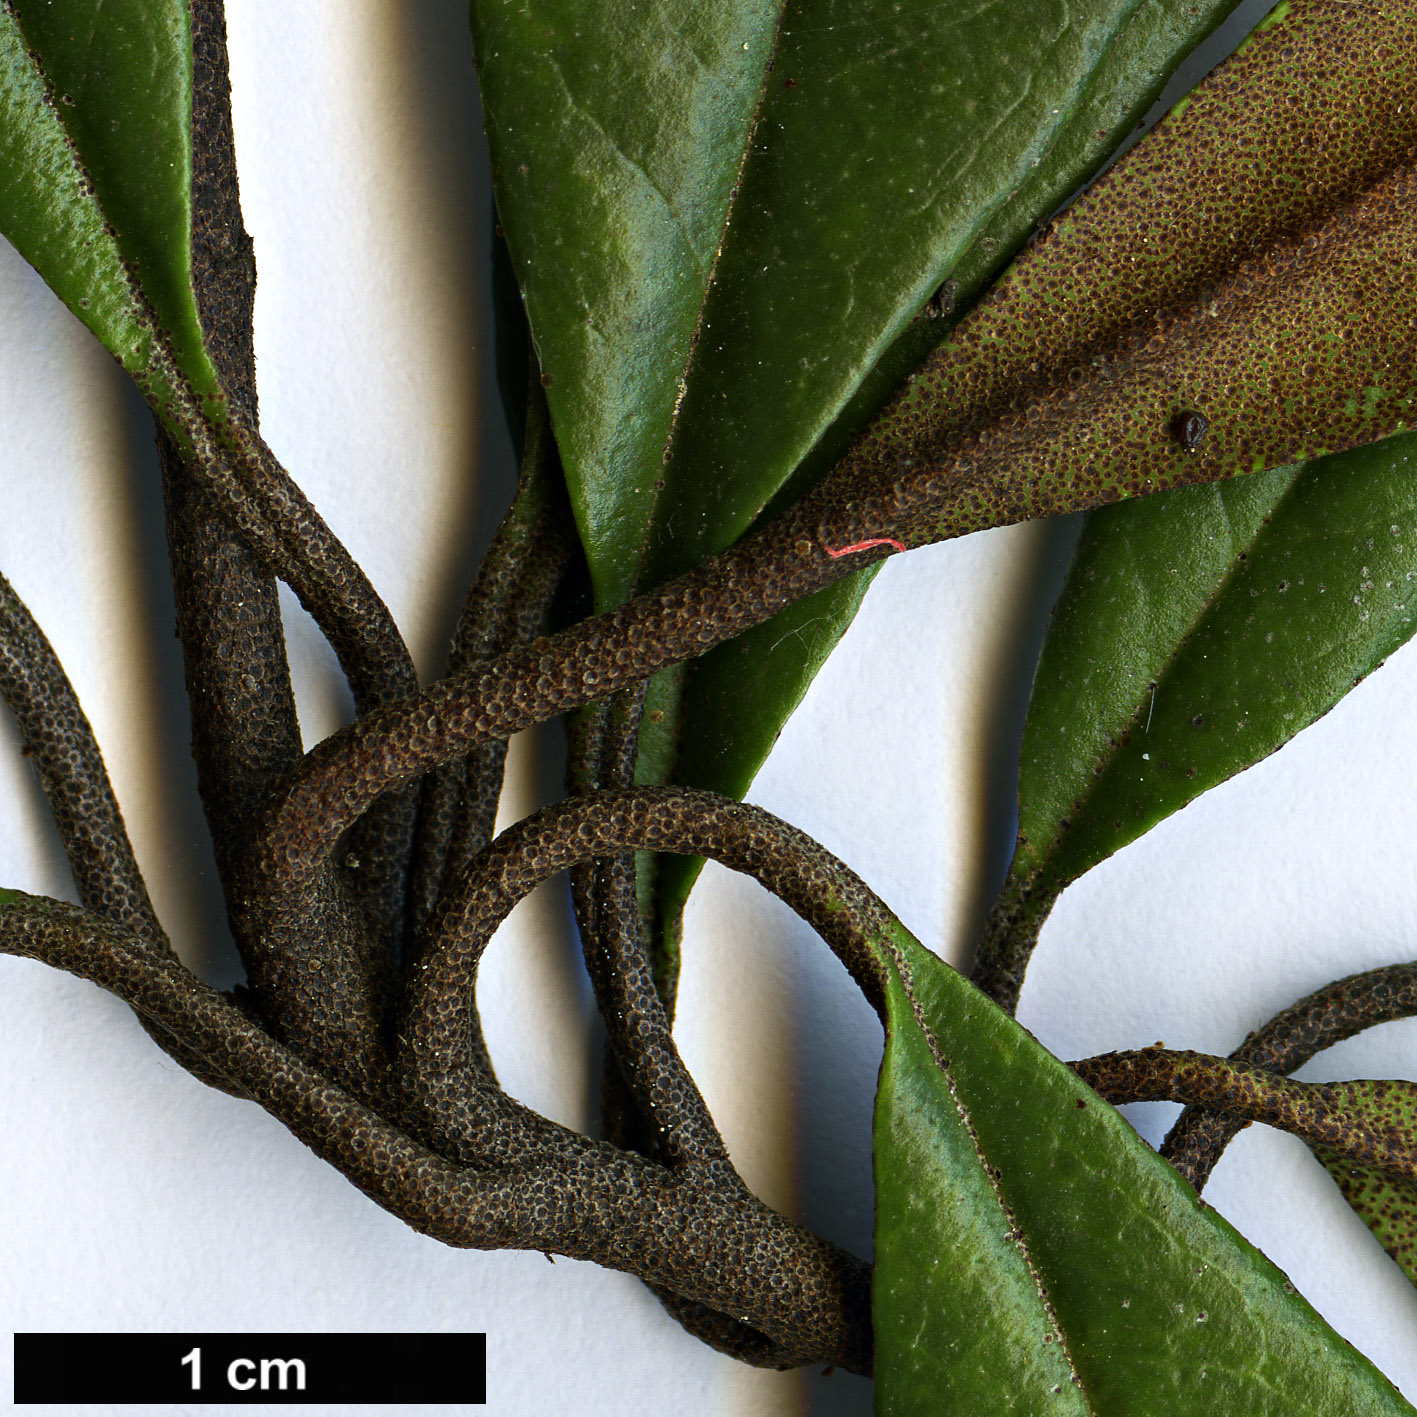 High resolution image: Family: Ericaceae - Genus: Rhododendron - Taxon: malayanum